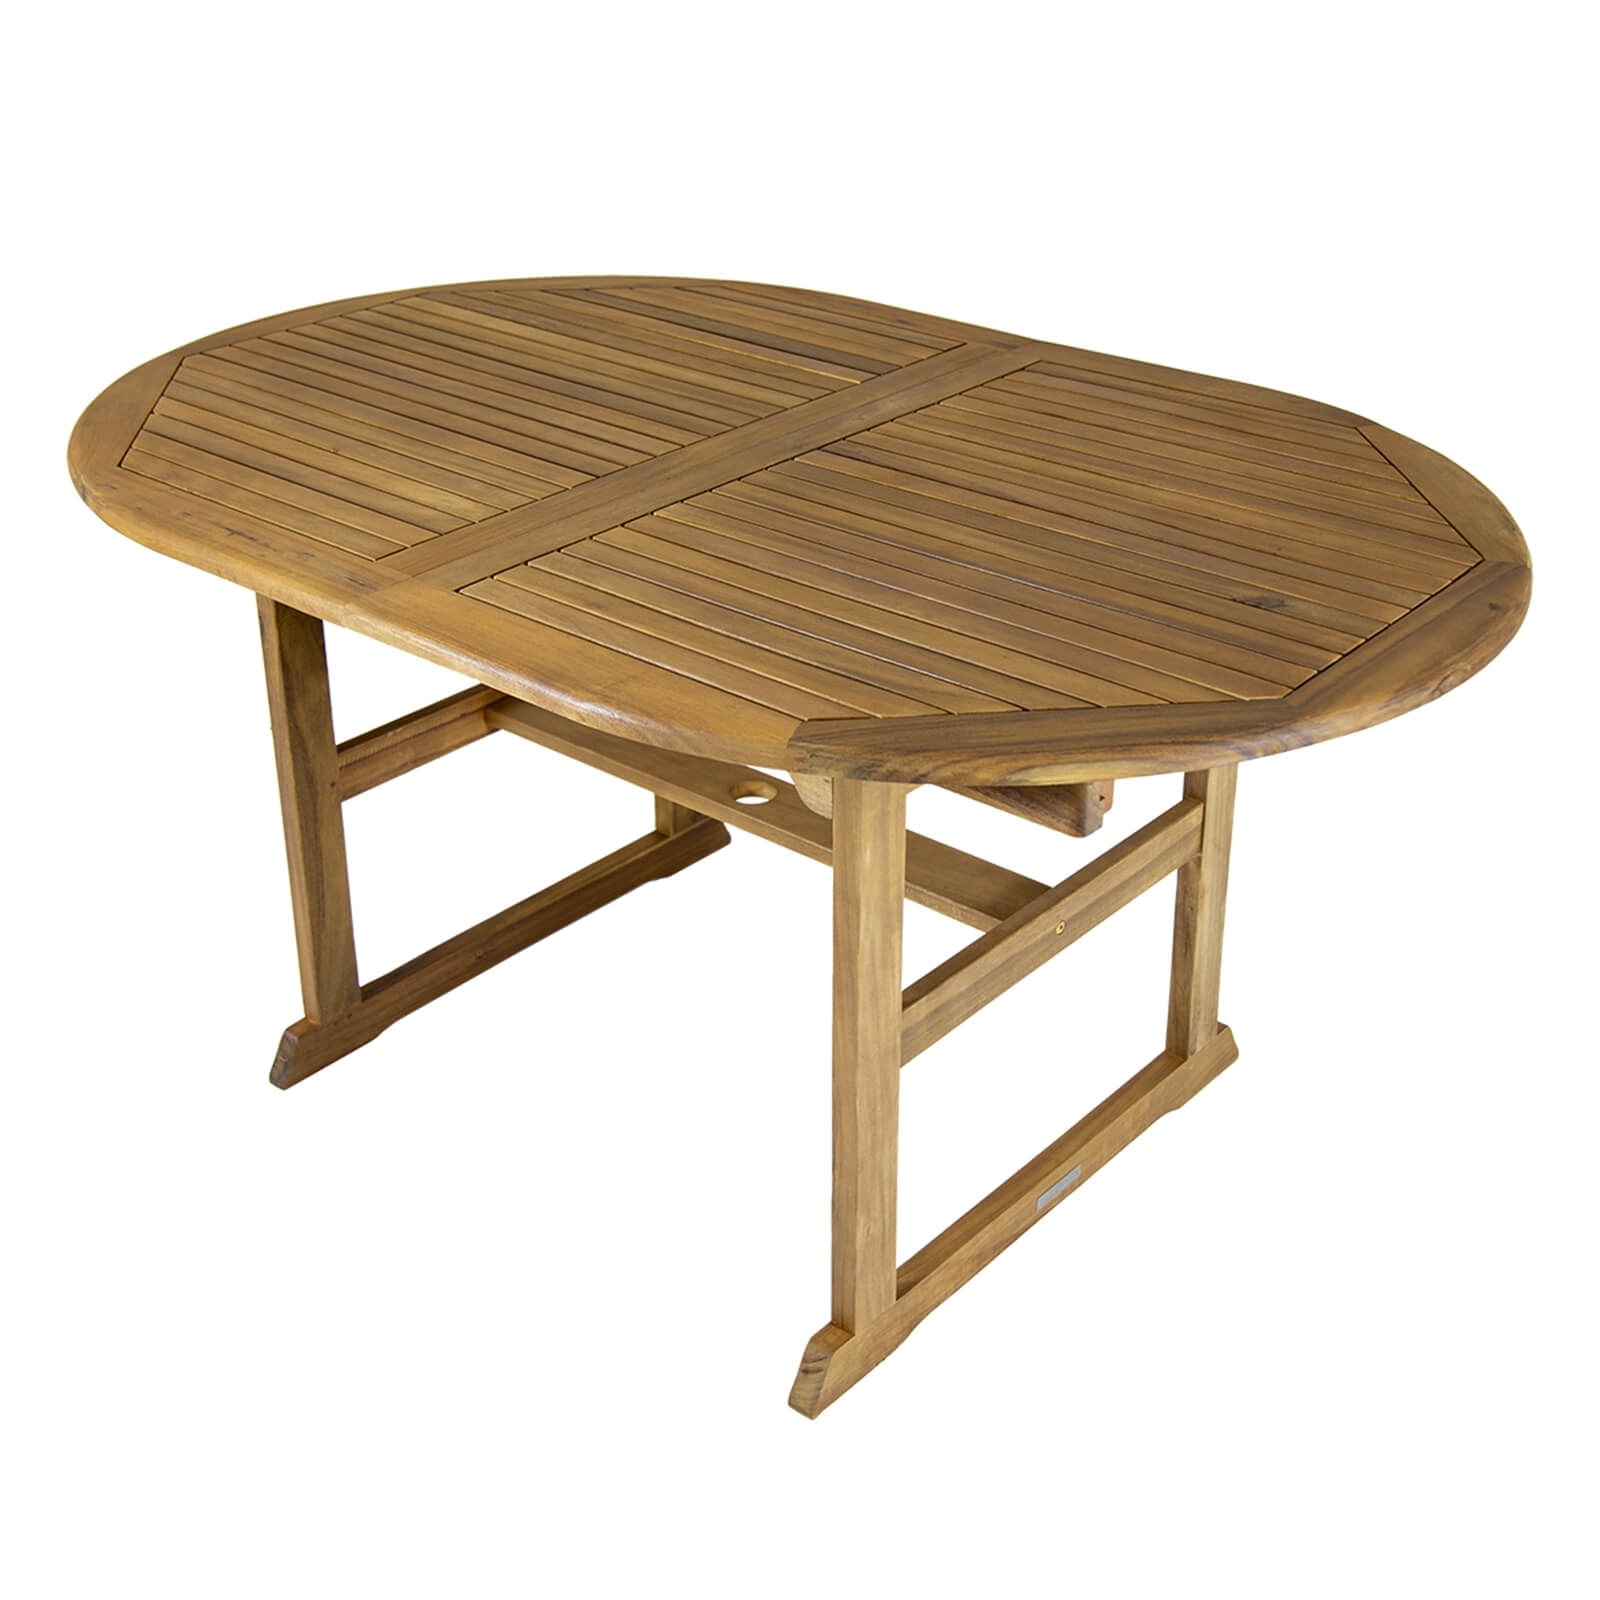 Charles Bentley Wooden FSC Acacia Oval Extendable Table